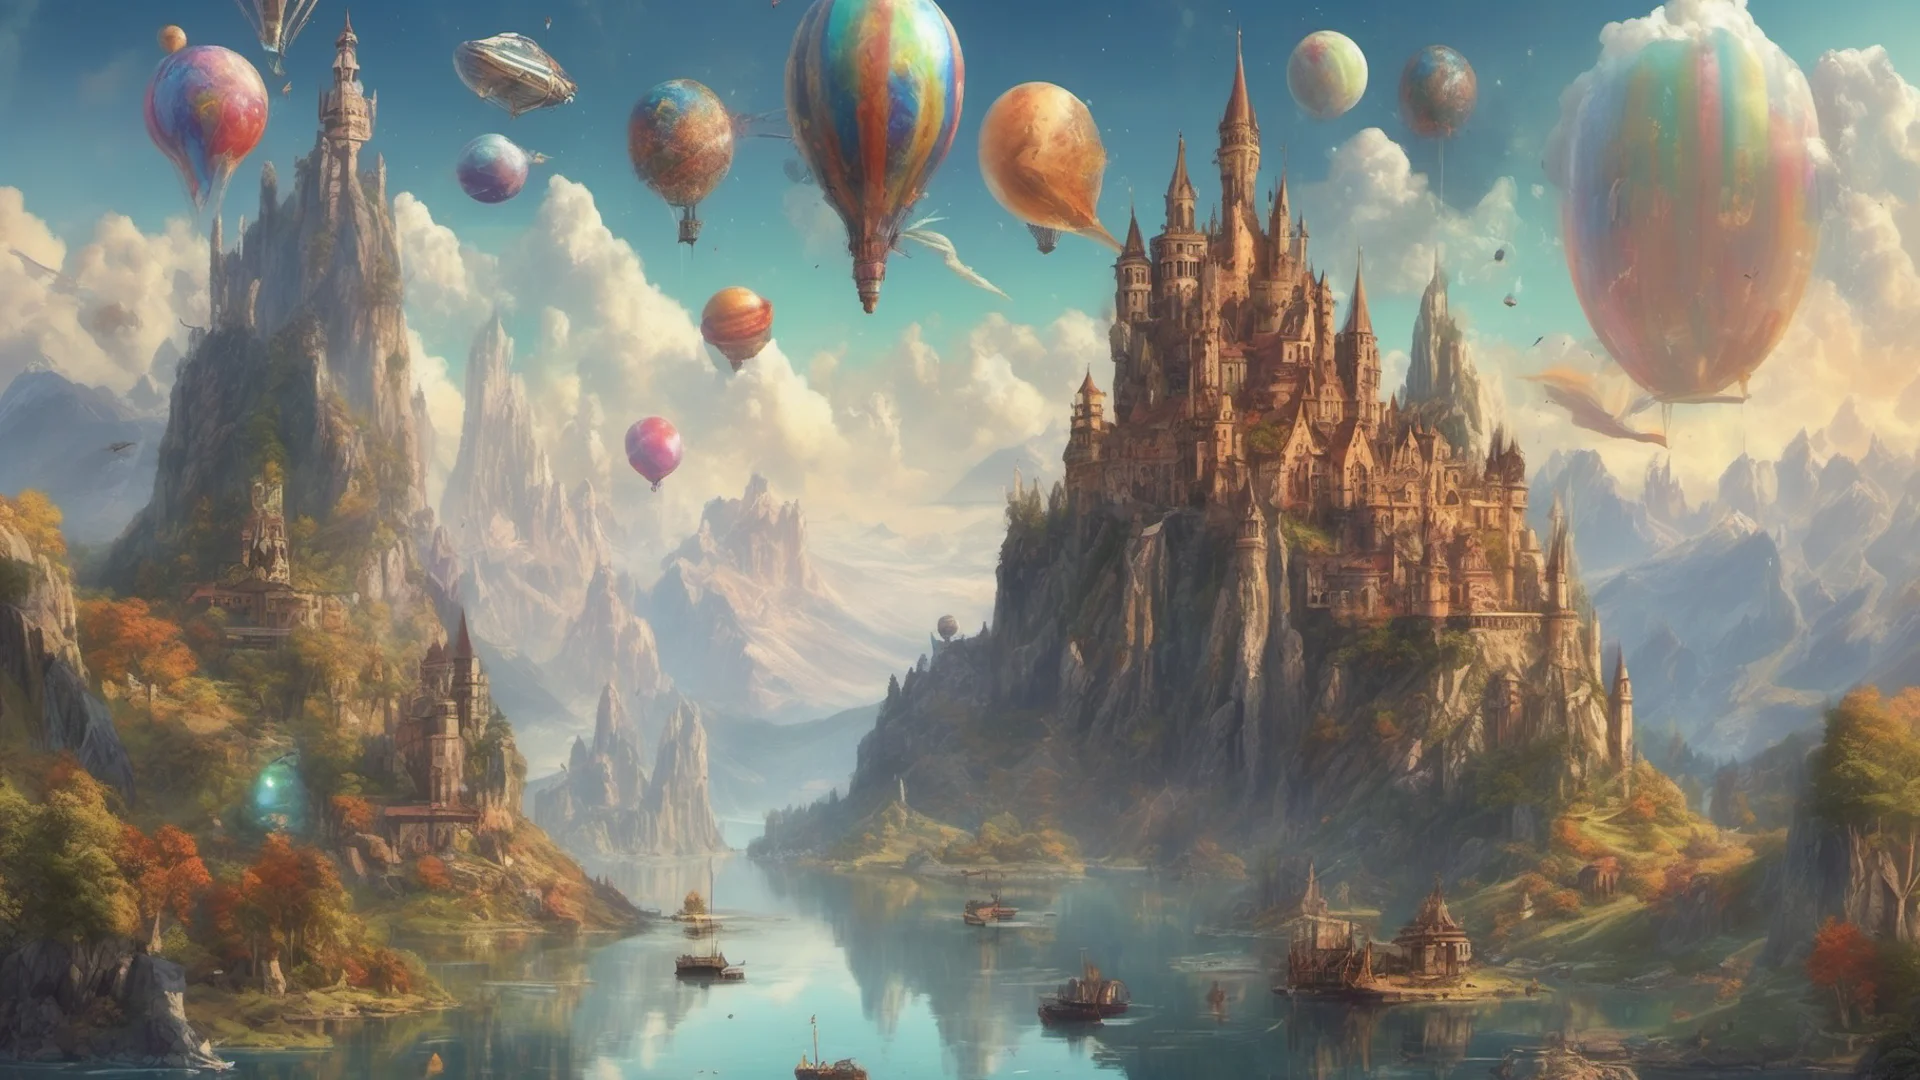 aiepic fantasy environment castle on tall mountain lakes sky with many colorful planets boats sailing airships and blimps floating   amazing awesome portrait 2 wide